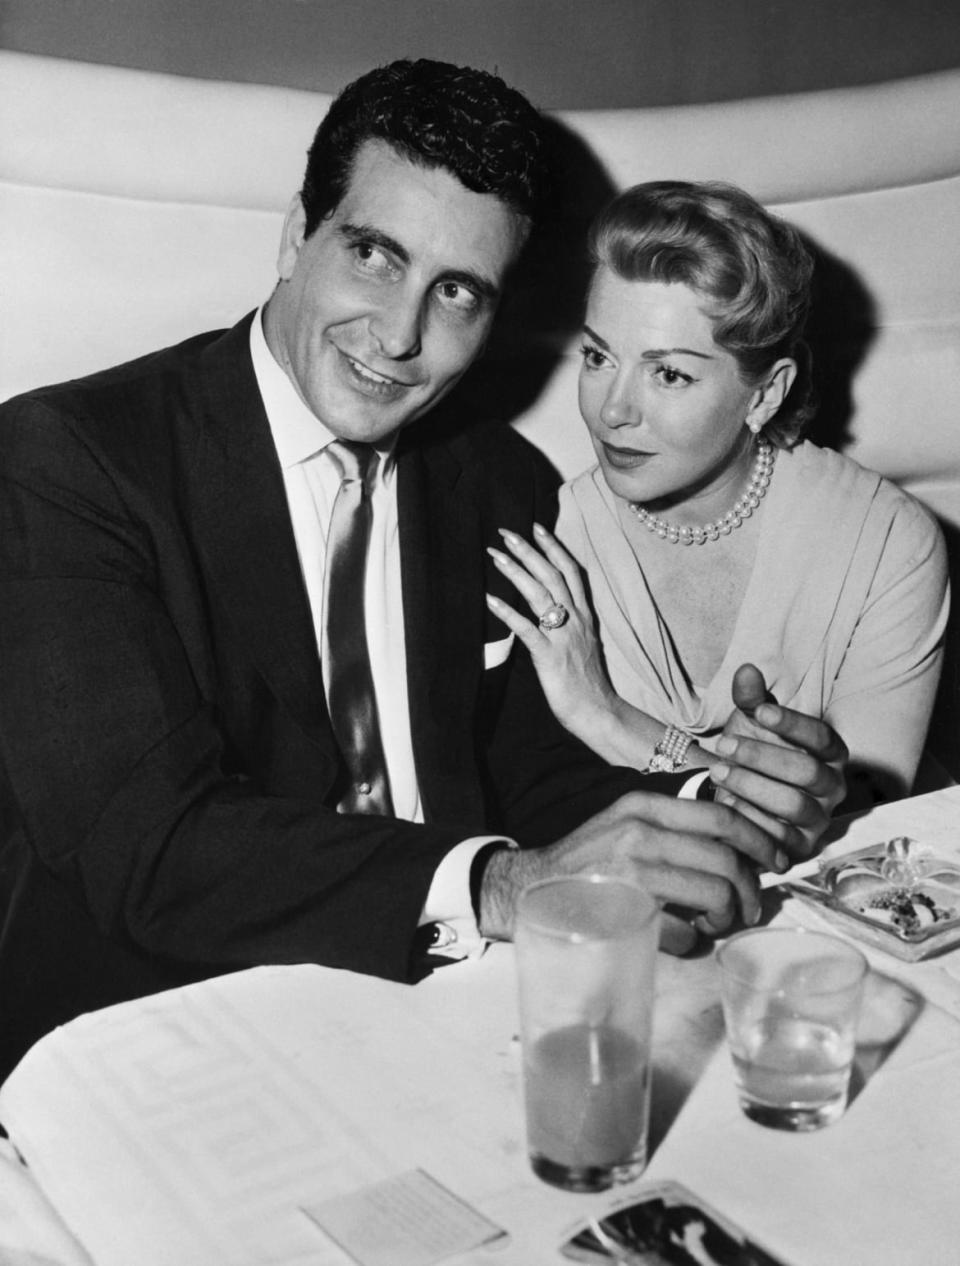 <div class="inline-image__caption"><p>Johnny Stompanato with Lana Turner at a Hollywood nightclub.</p></div> <div class="inline-image__credit">Bettmann</div>